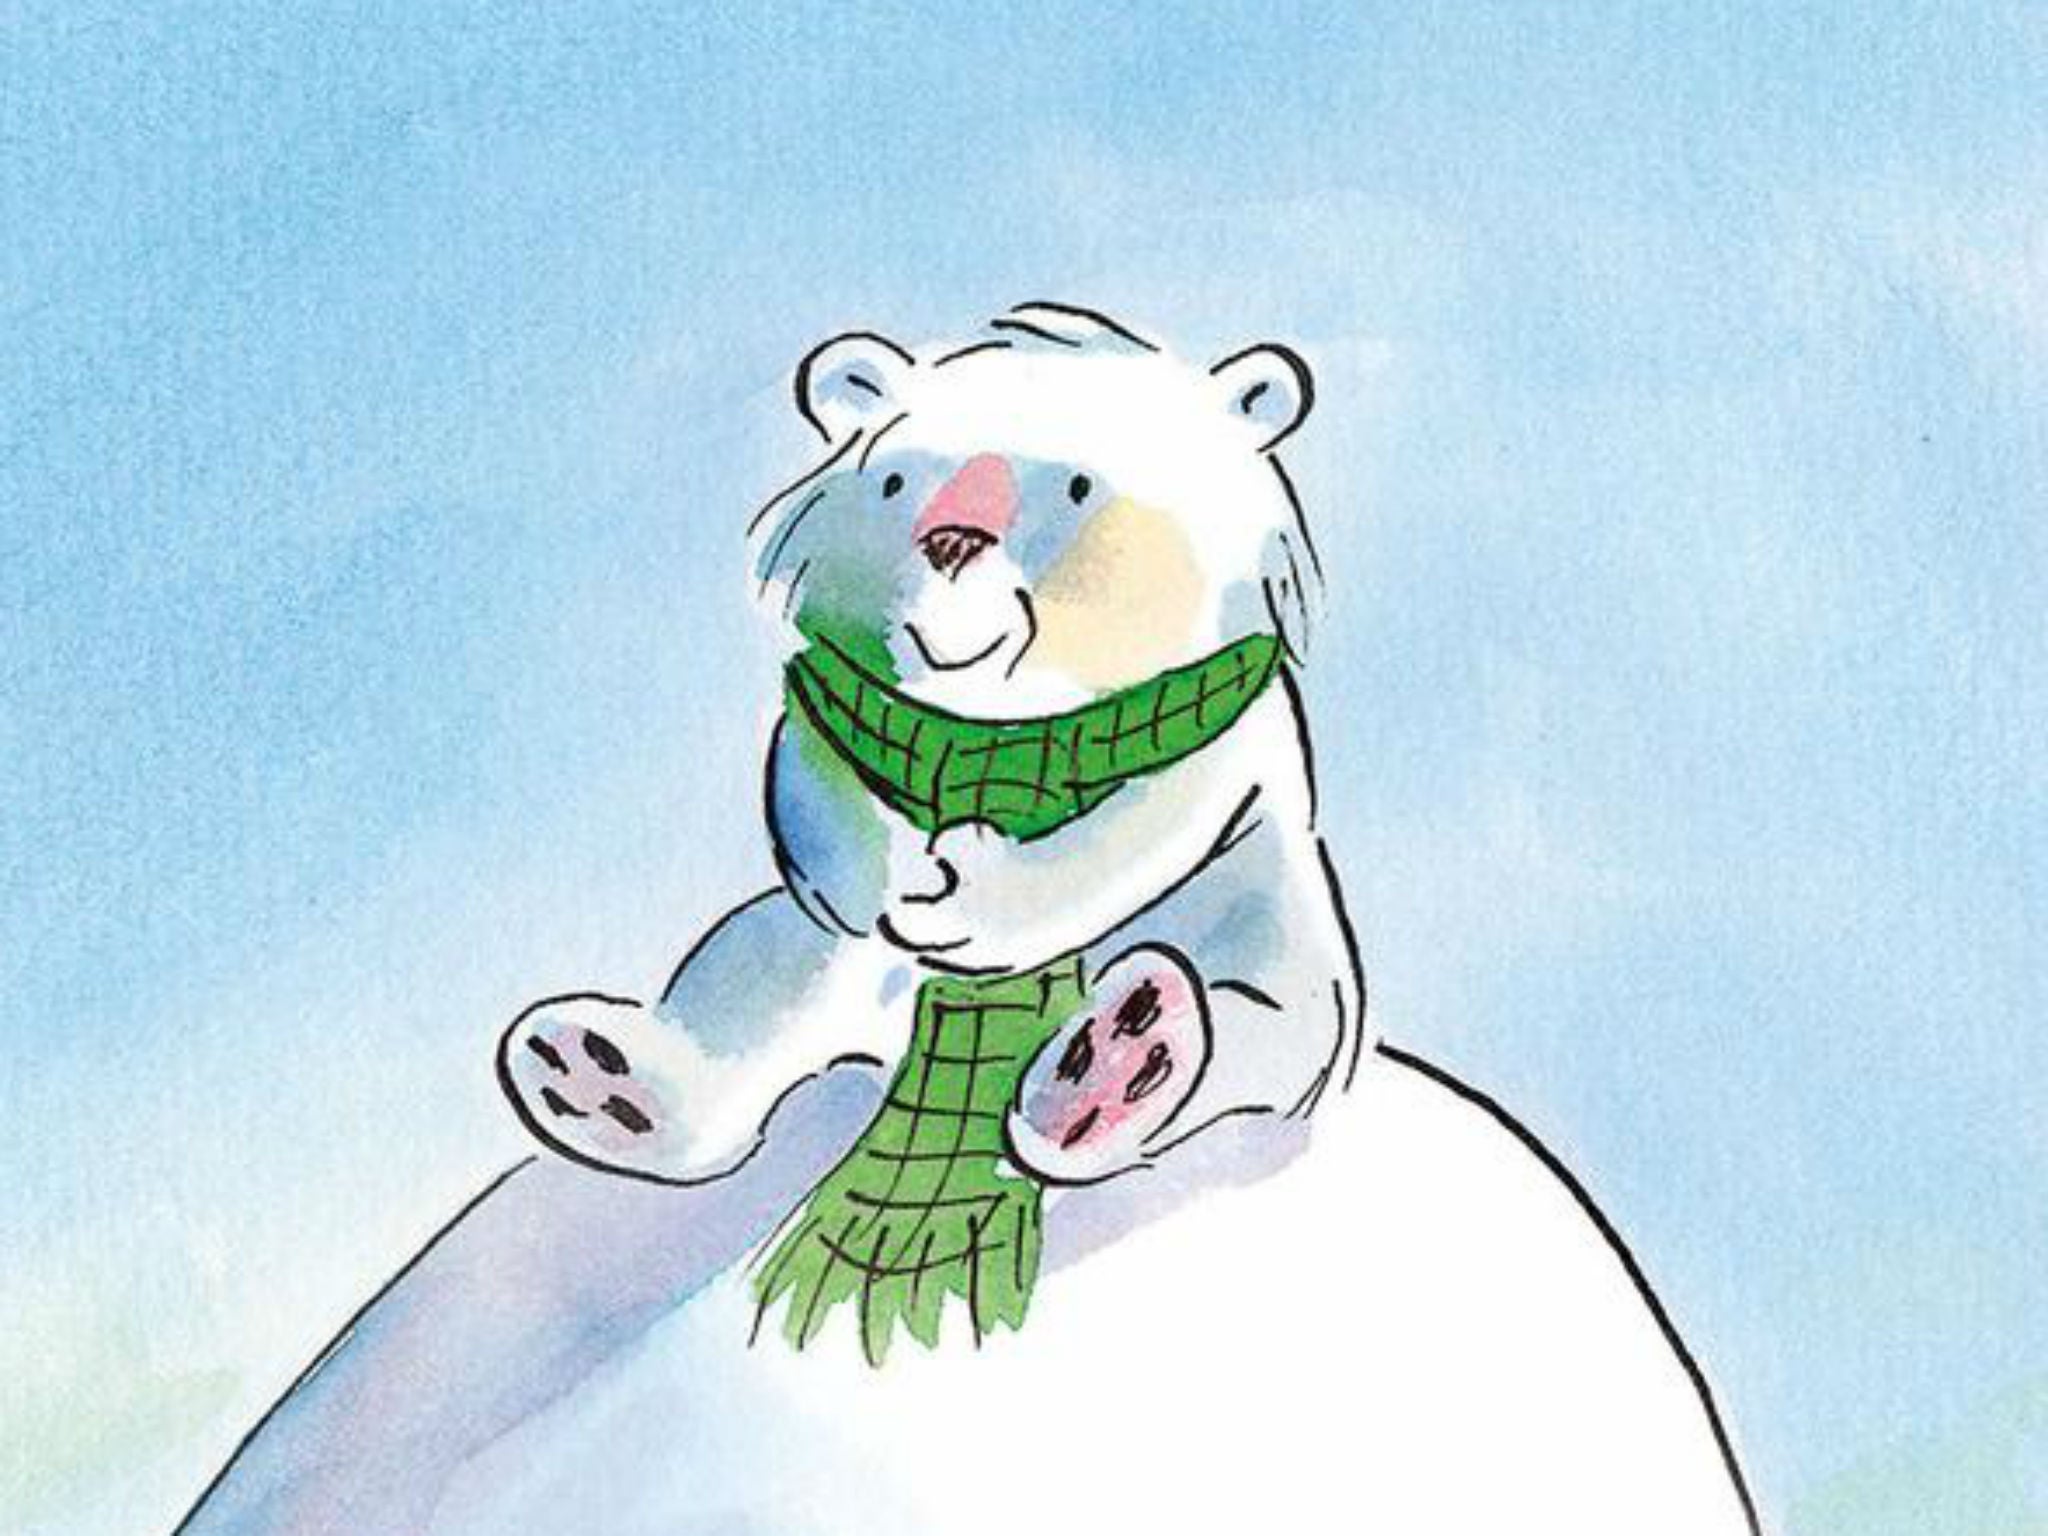 The Bear Who Went Boo! will reach shelves in November, just in time for Christmas